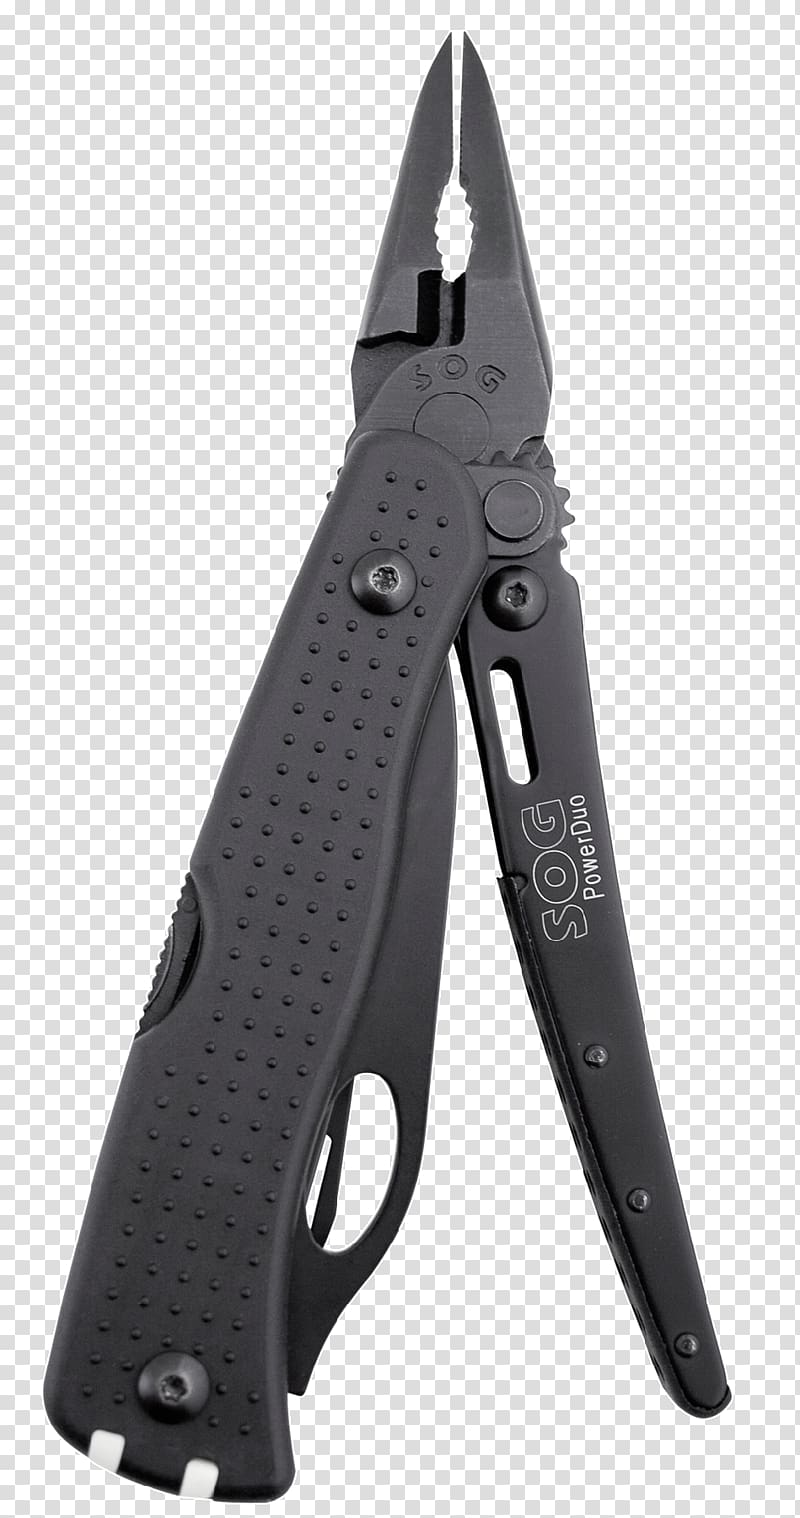 Multi-function Tools & Knives Knife SOG Specialty Knives & Tools, LLC Black oxide, Multi-purpose transparent background PNG clipart